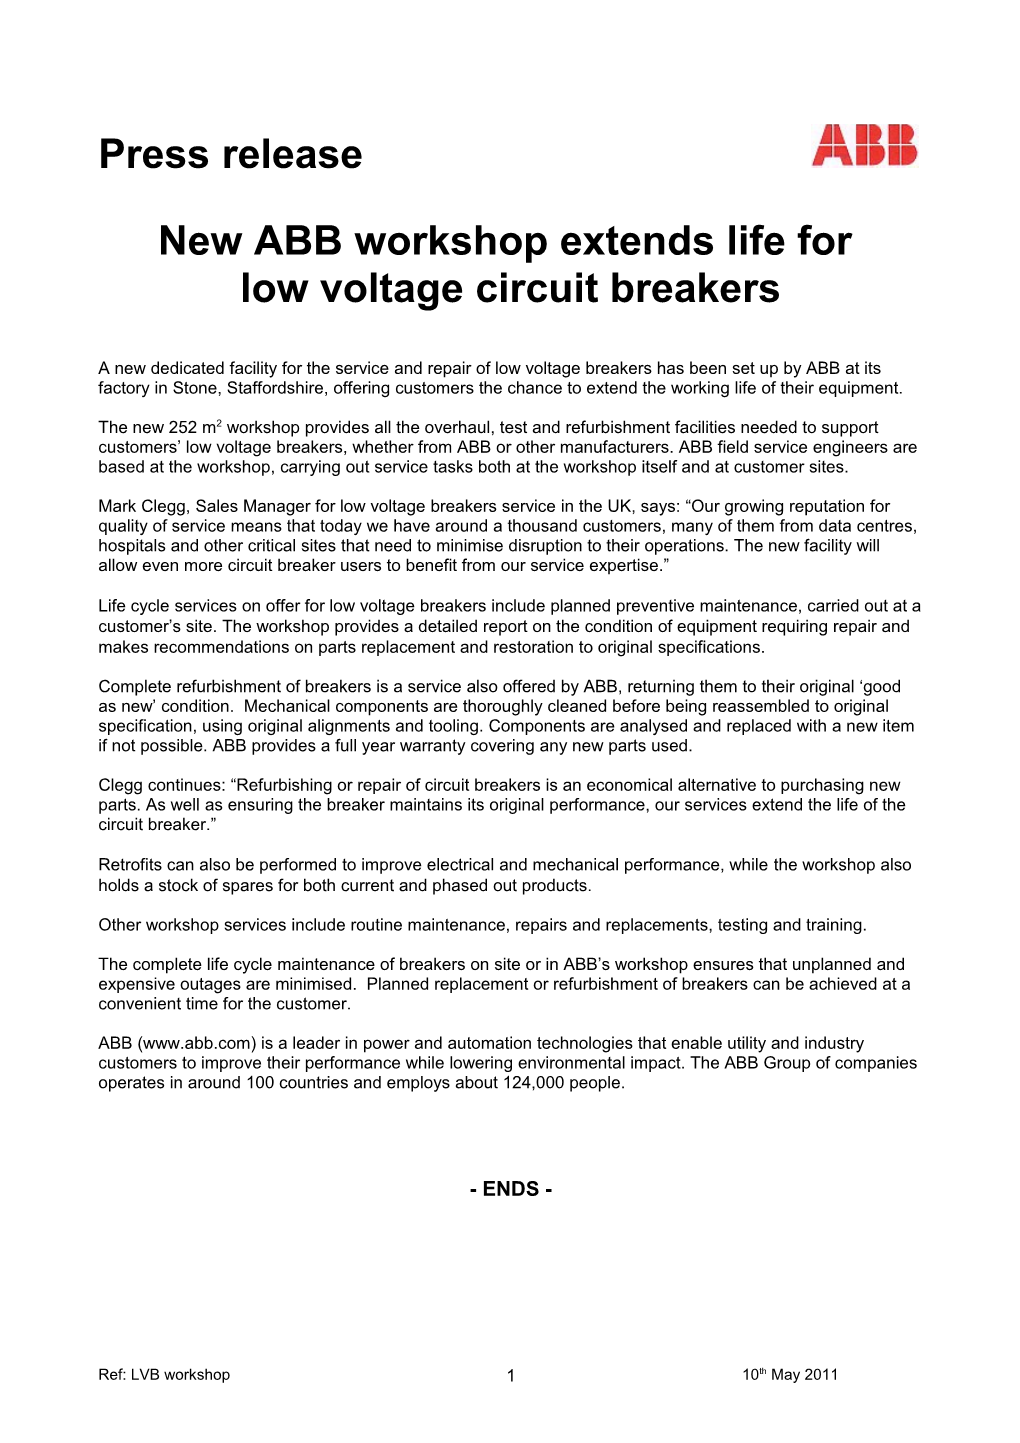 New ABB Workshop Extends Life For